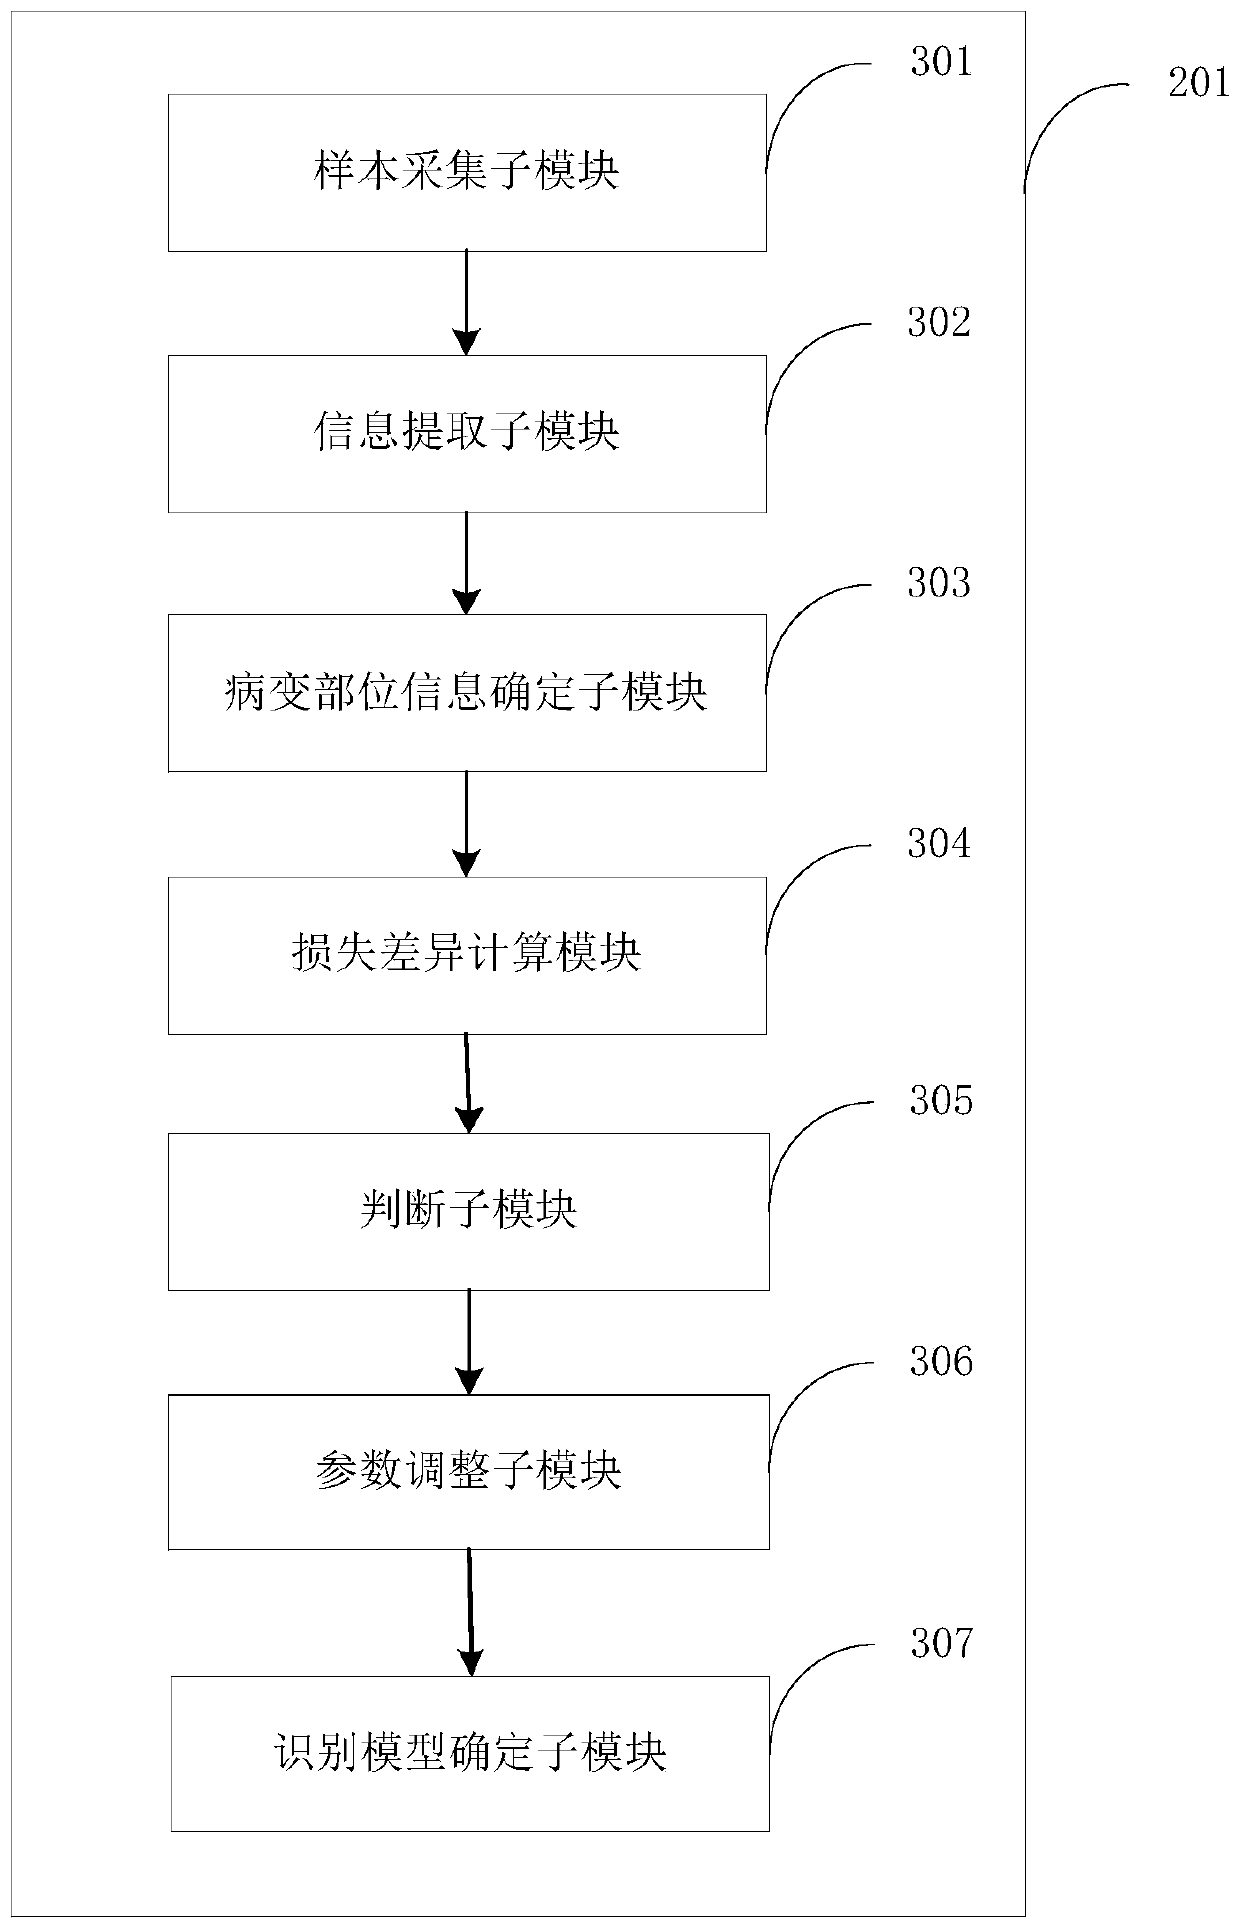 Endoscope system, endoscope image recognition method and equipment, and storable medium